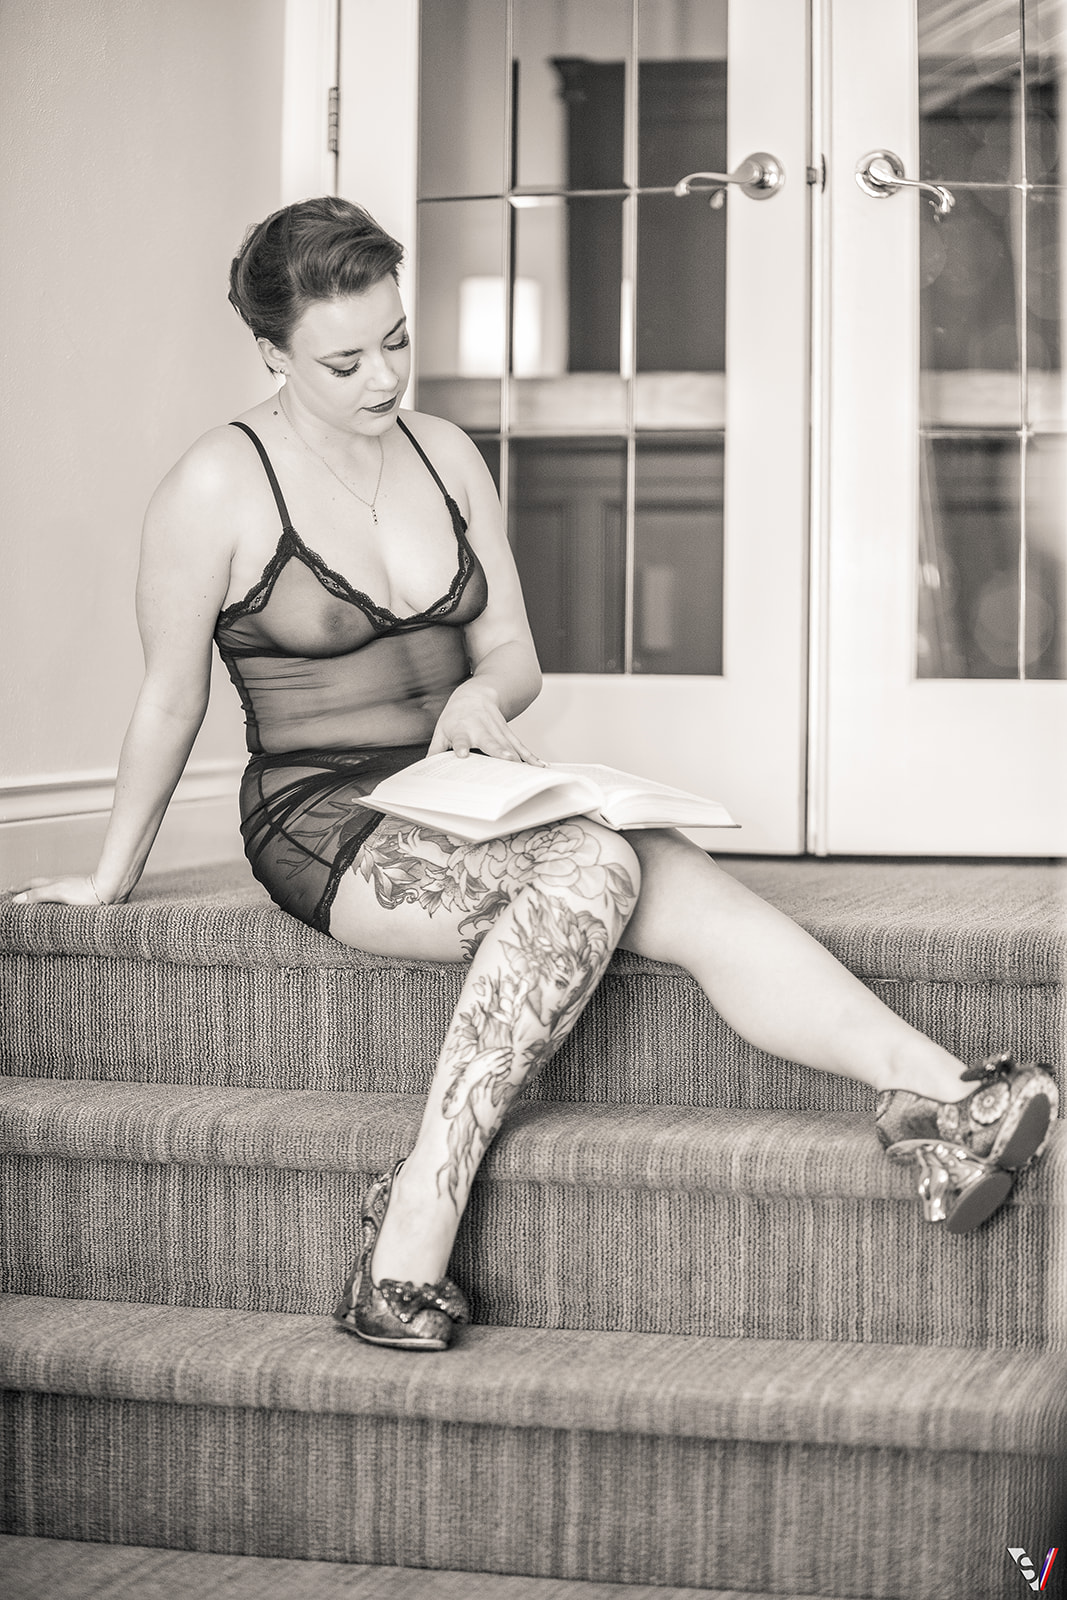 Amazing tattoos for a bridal boudoir photo session. 